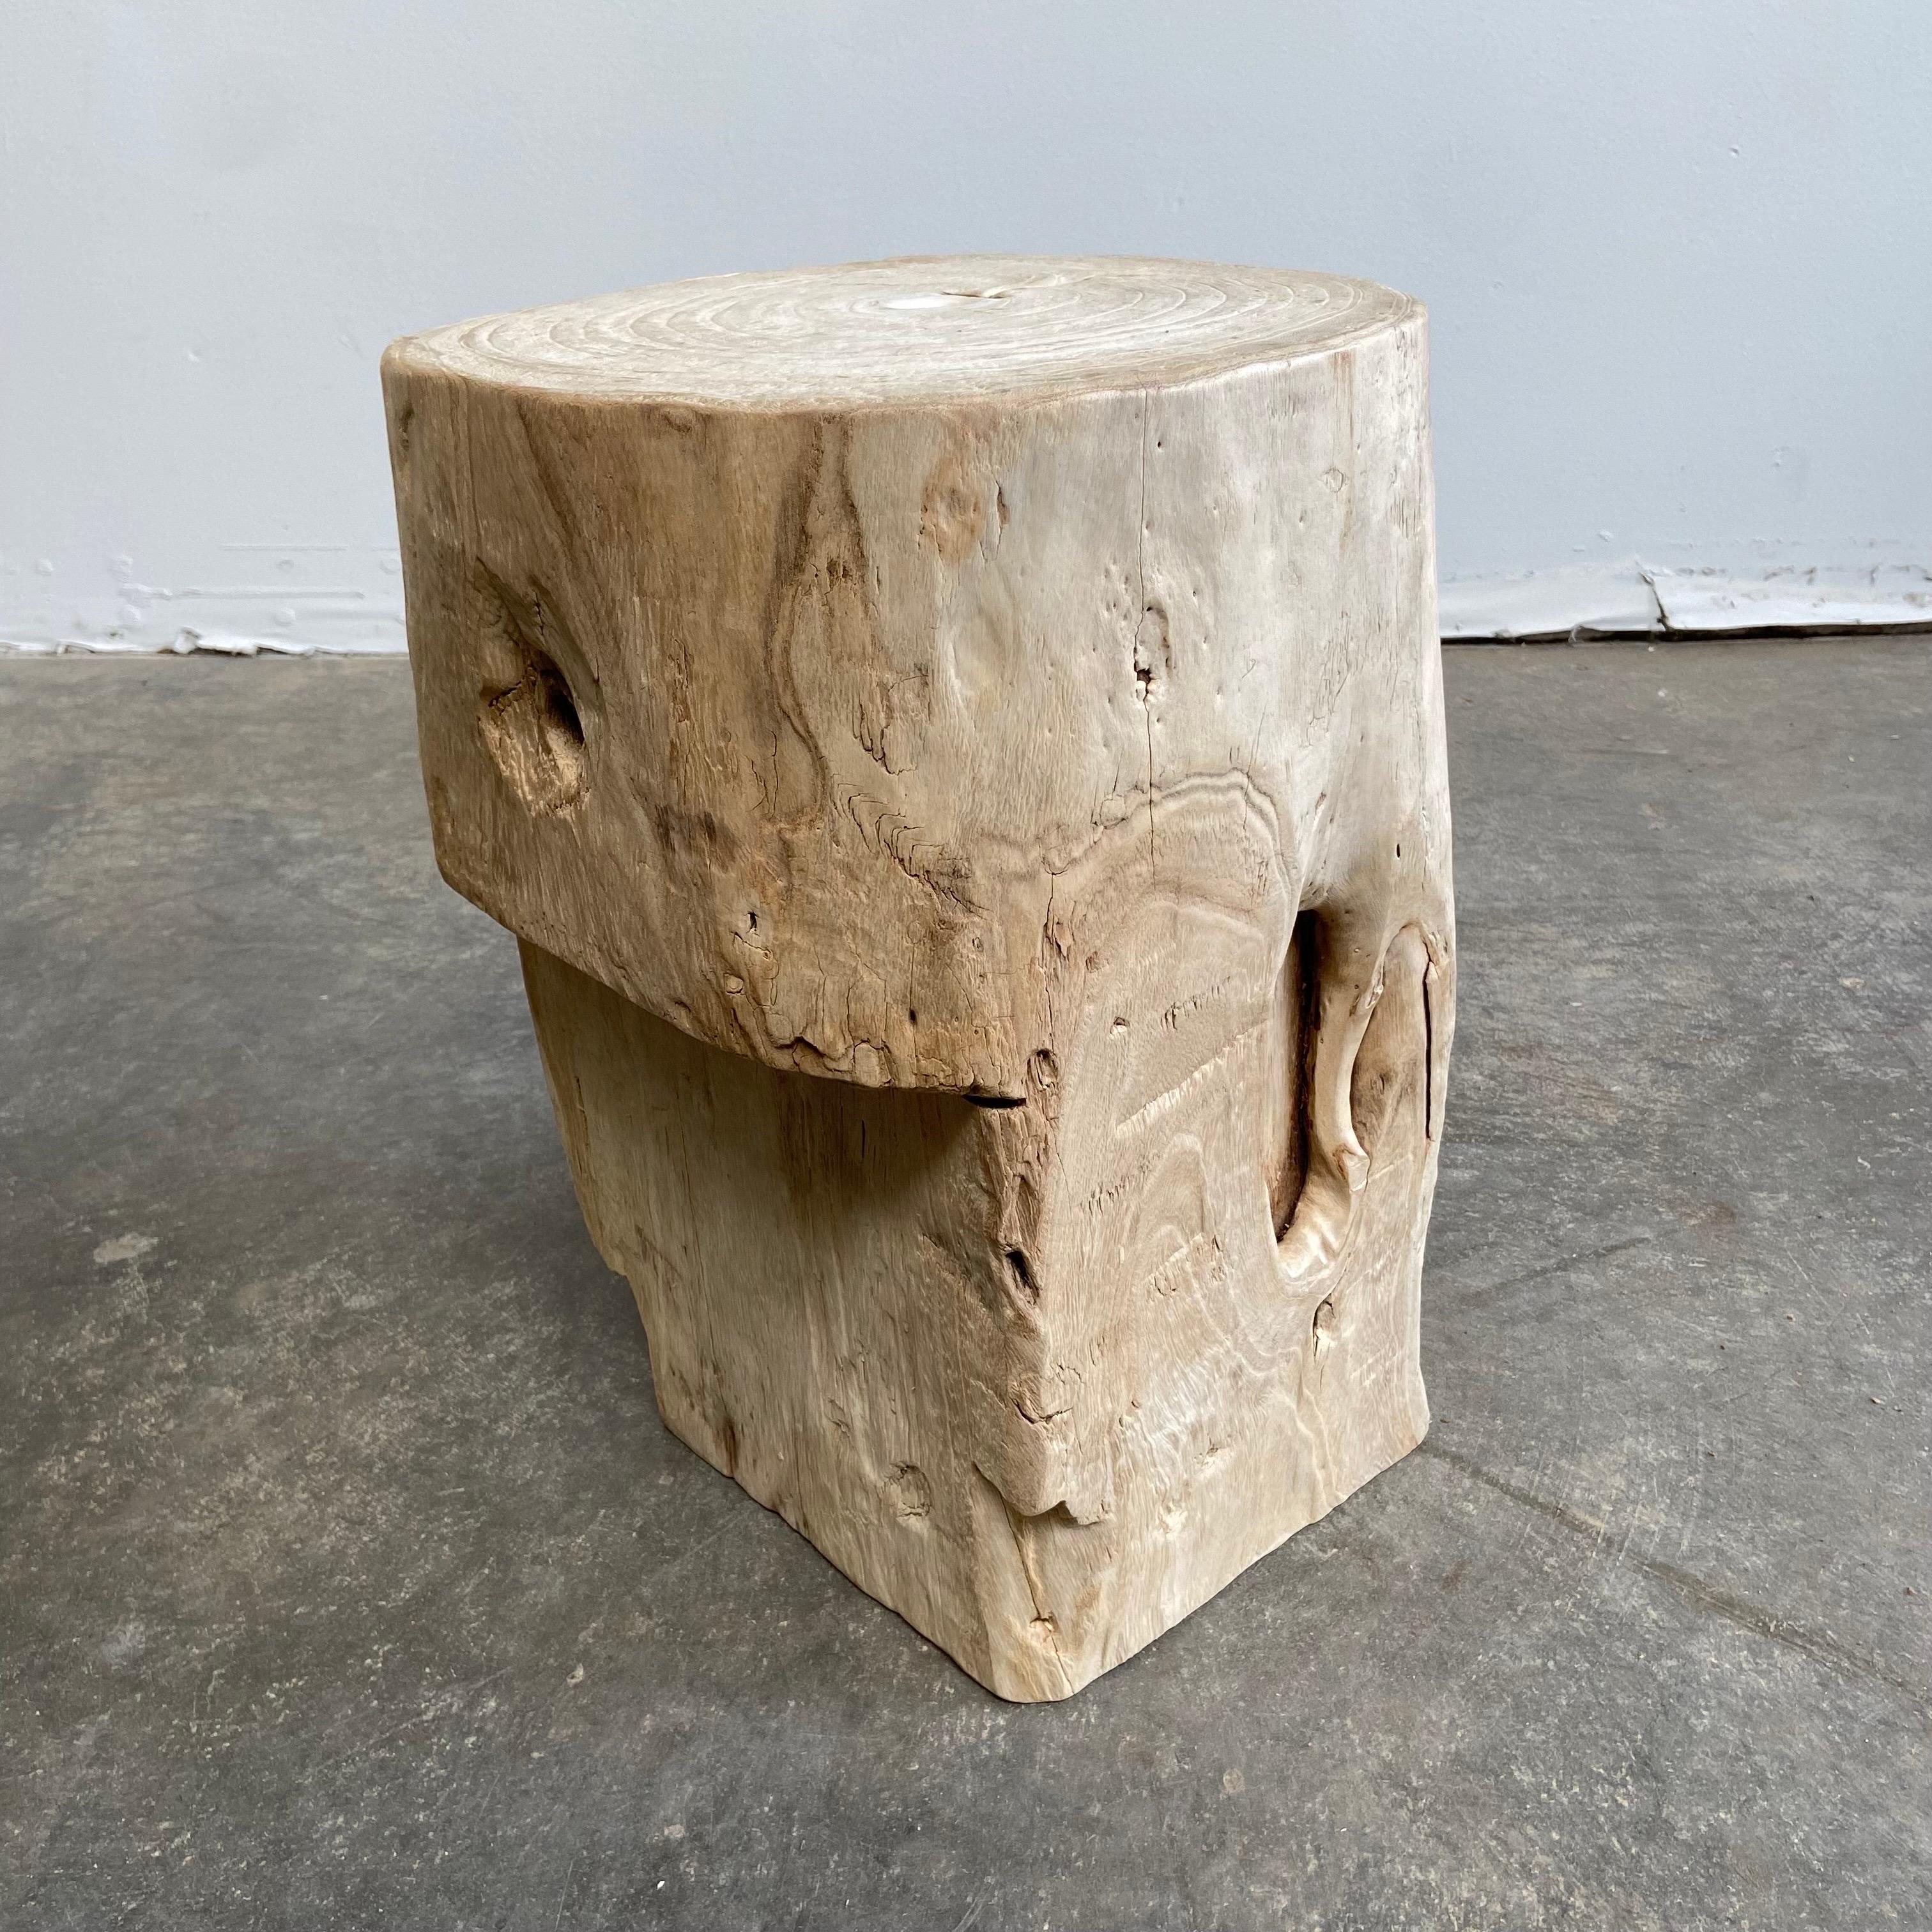 Contemporary Natural Wood Stump Side Table or Stool